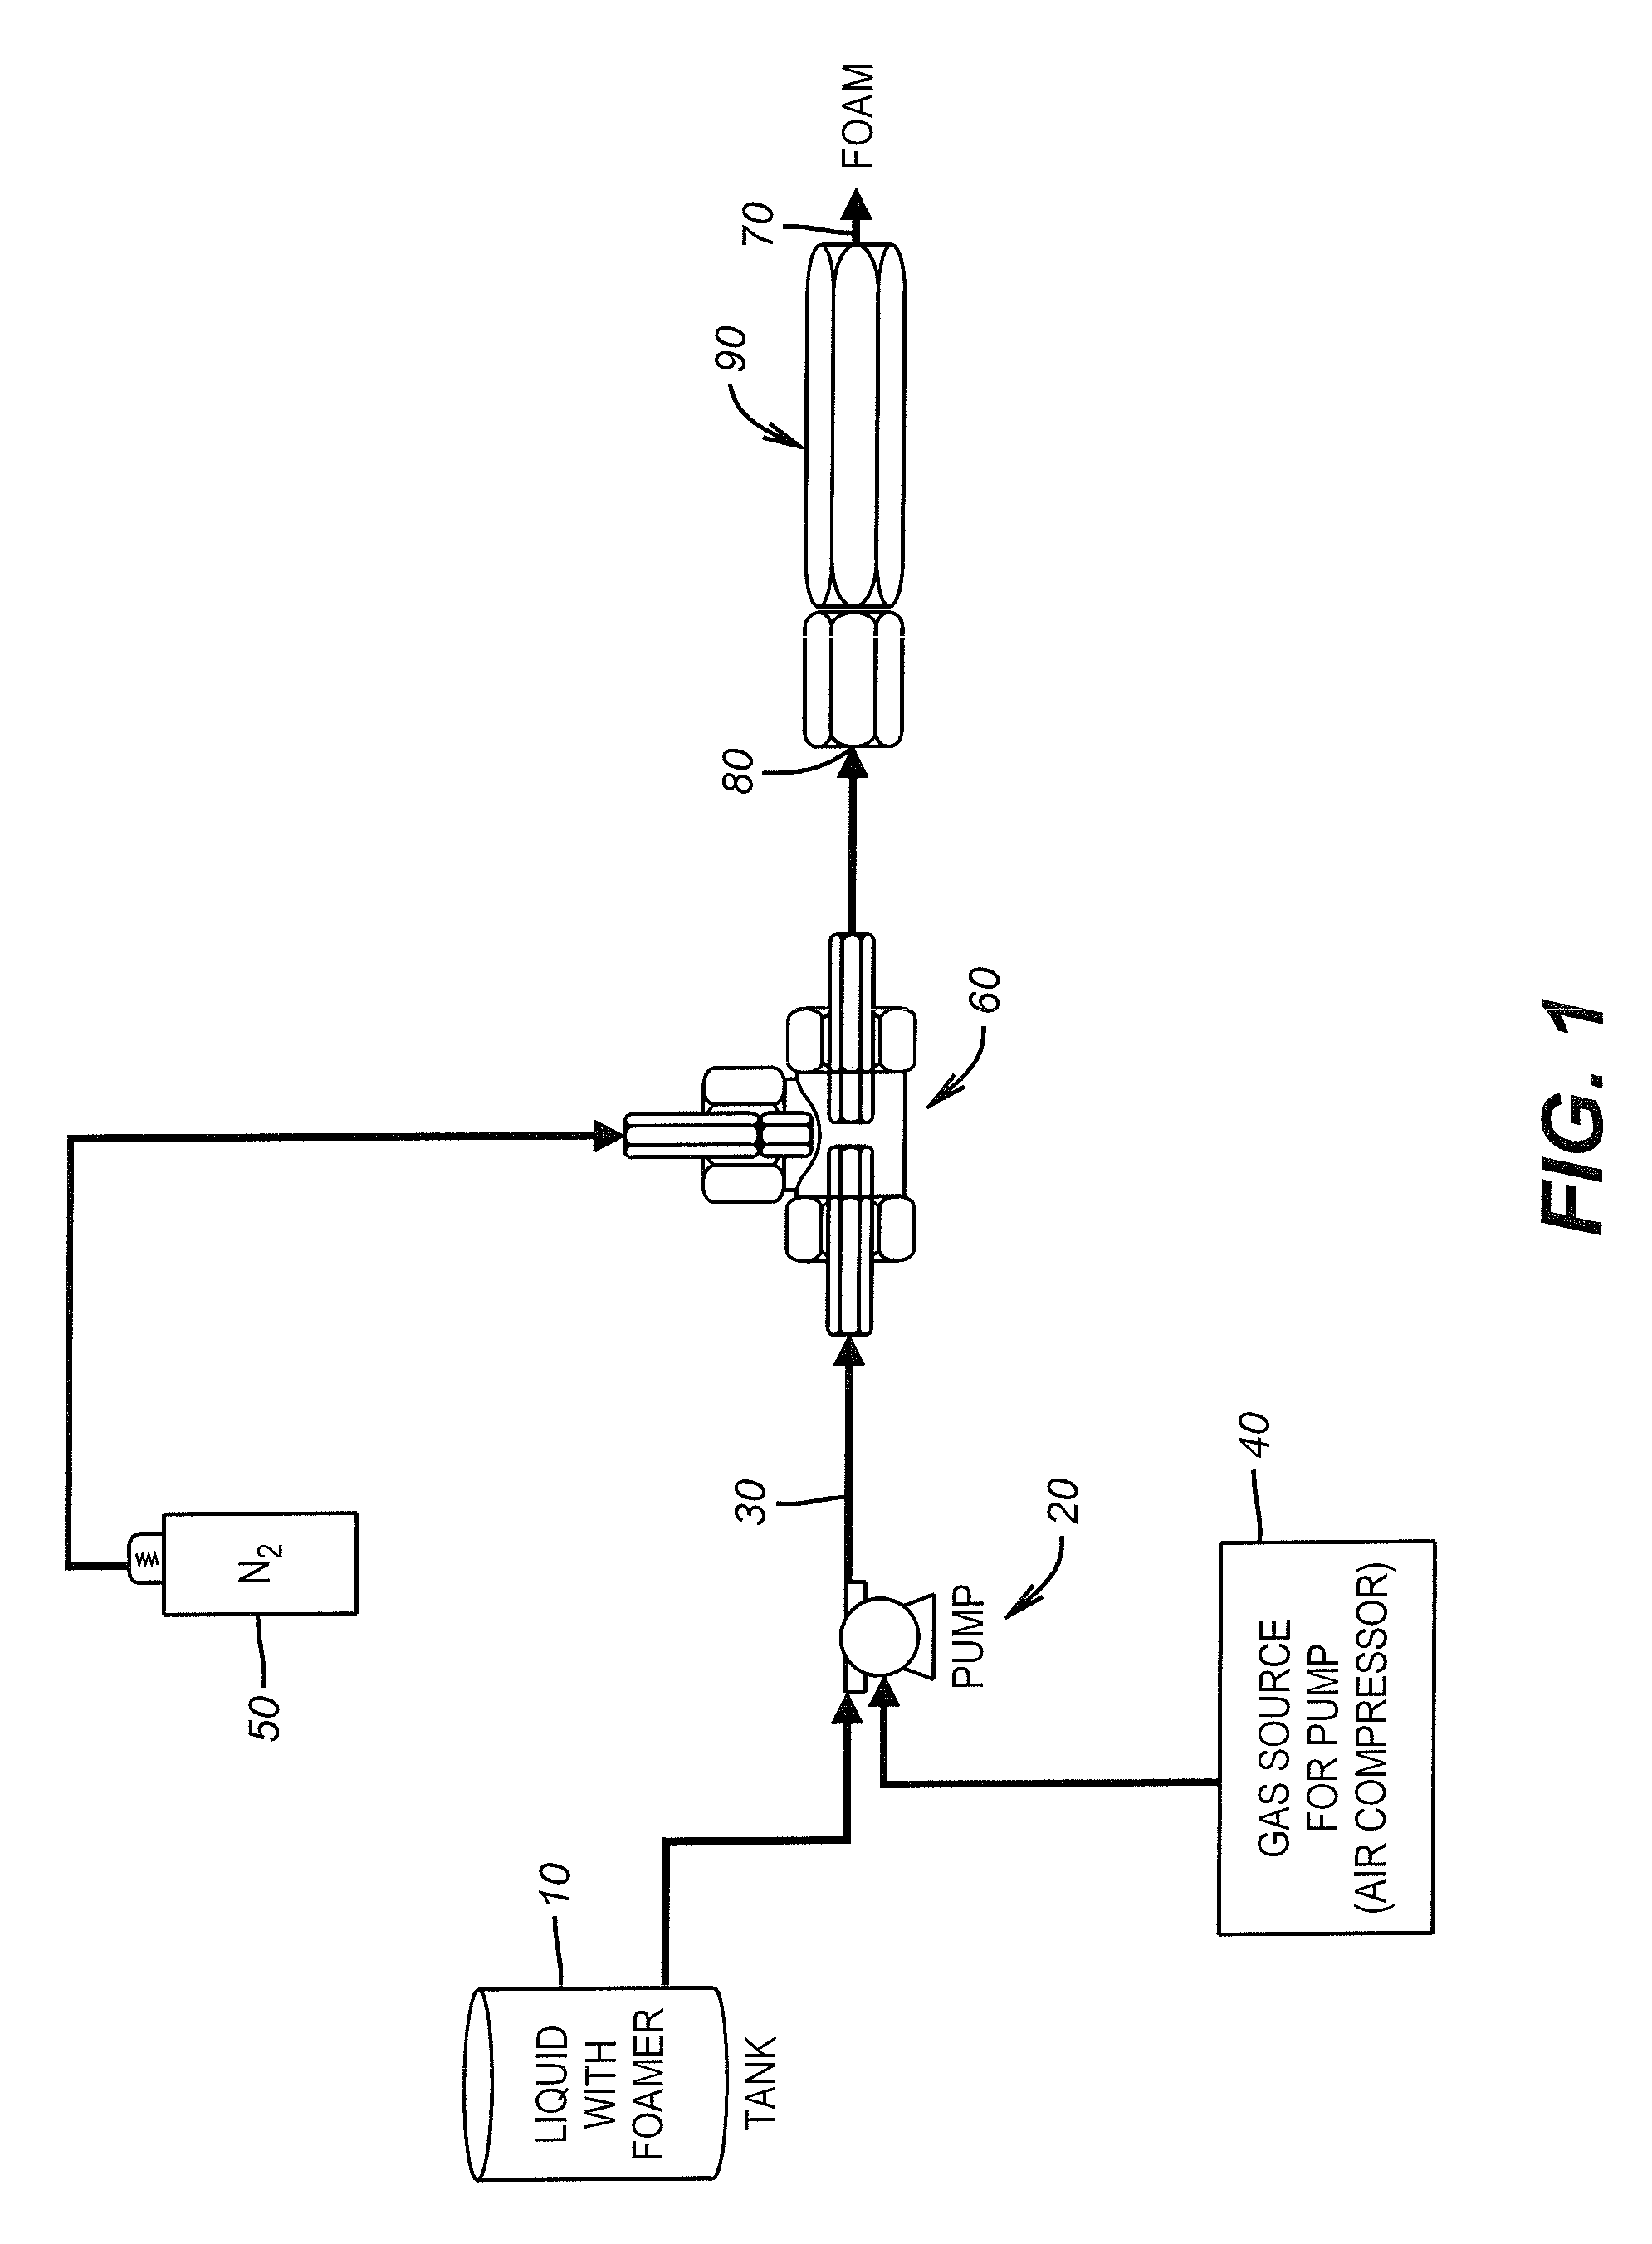 Method of Treating Flow Conduits and Vessels with Foamed Composition